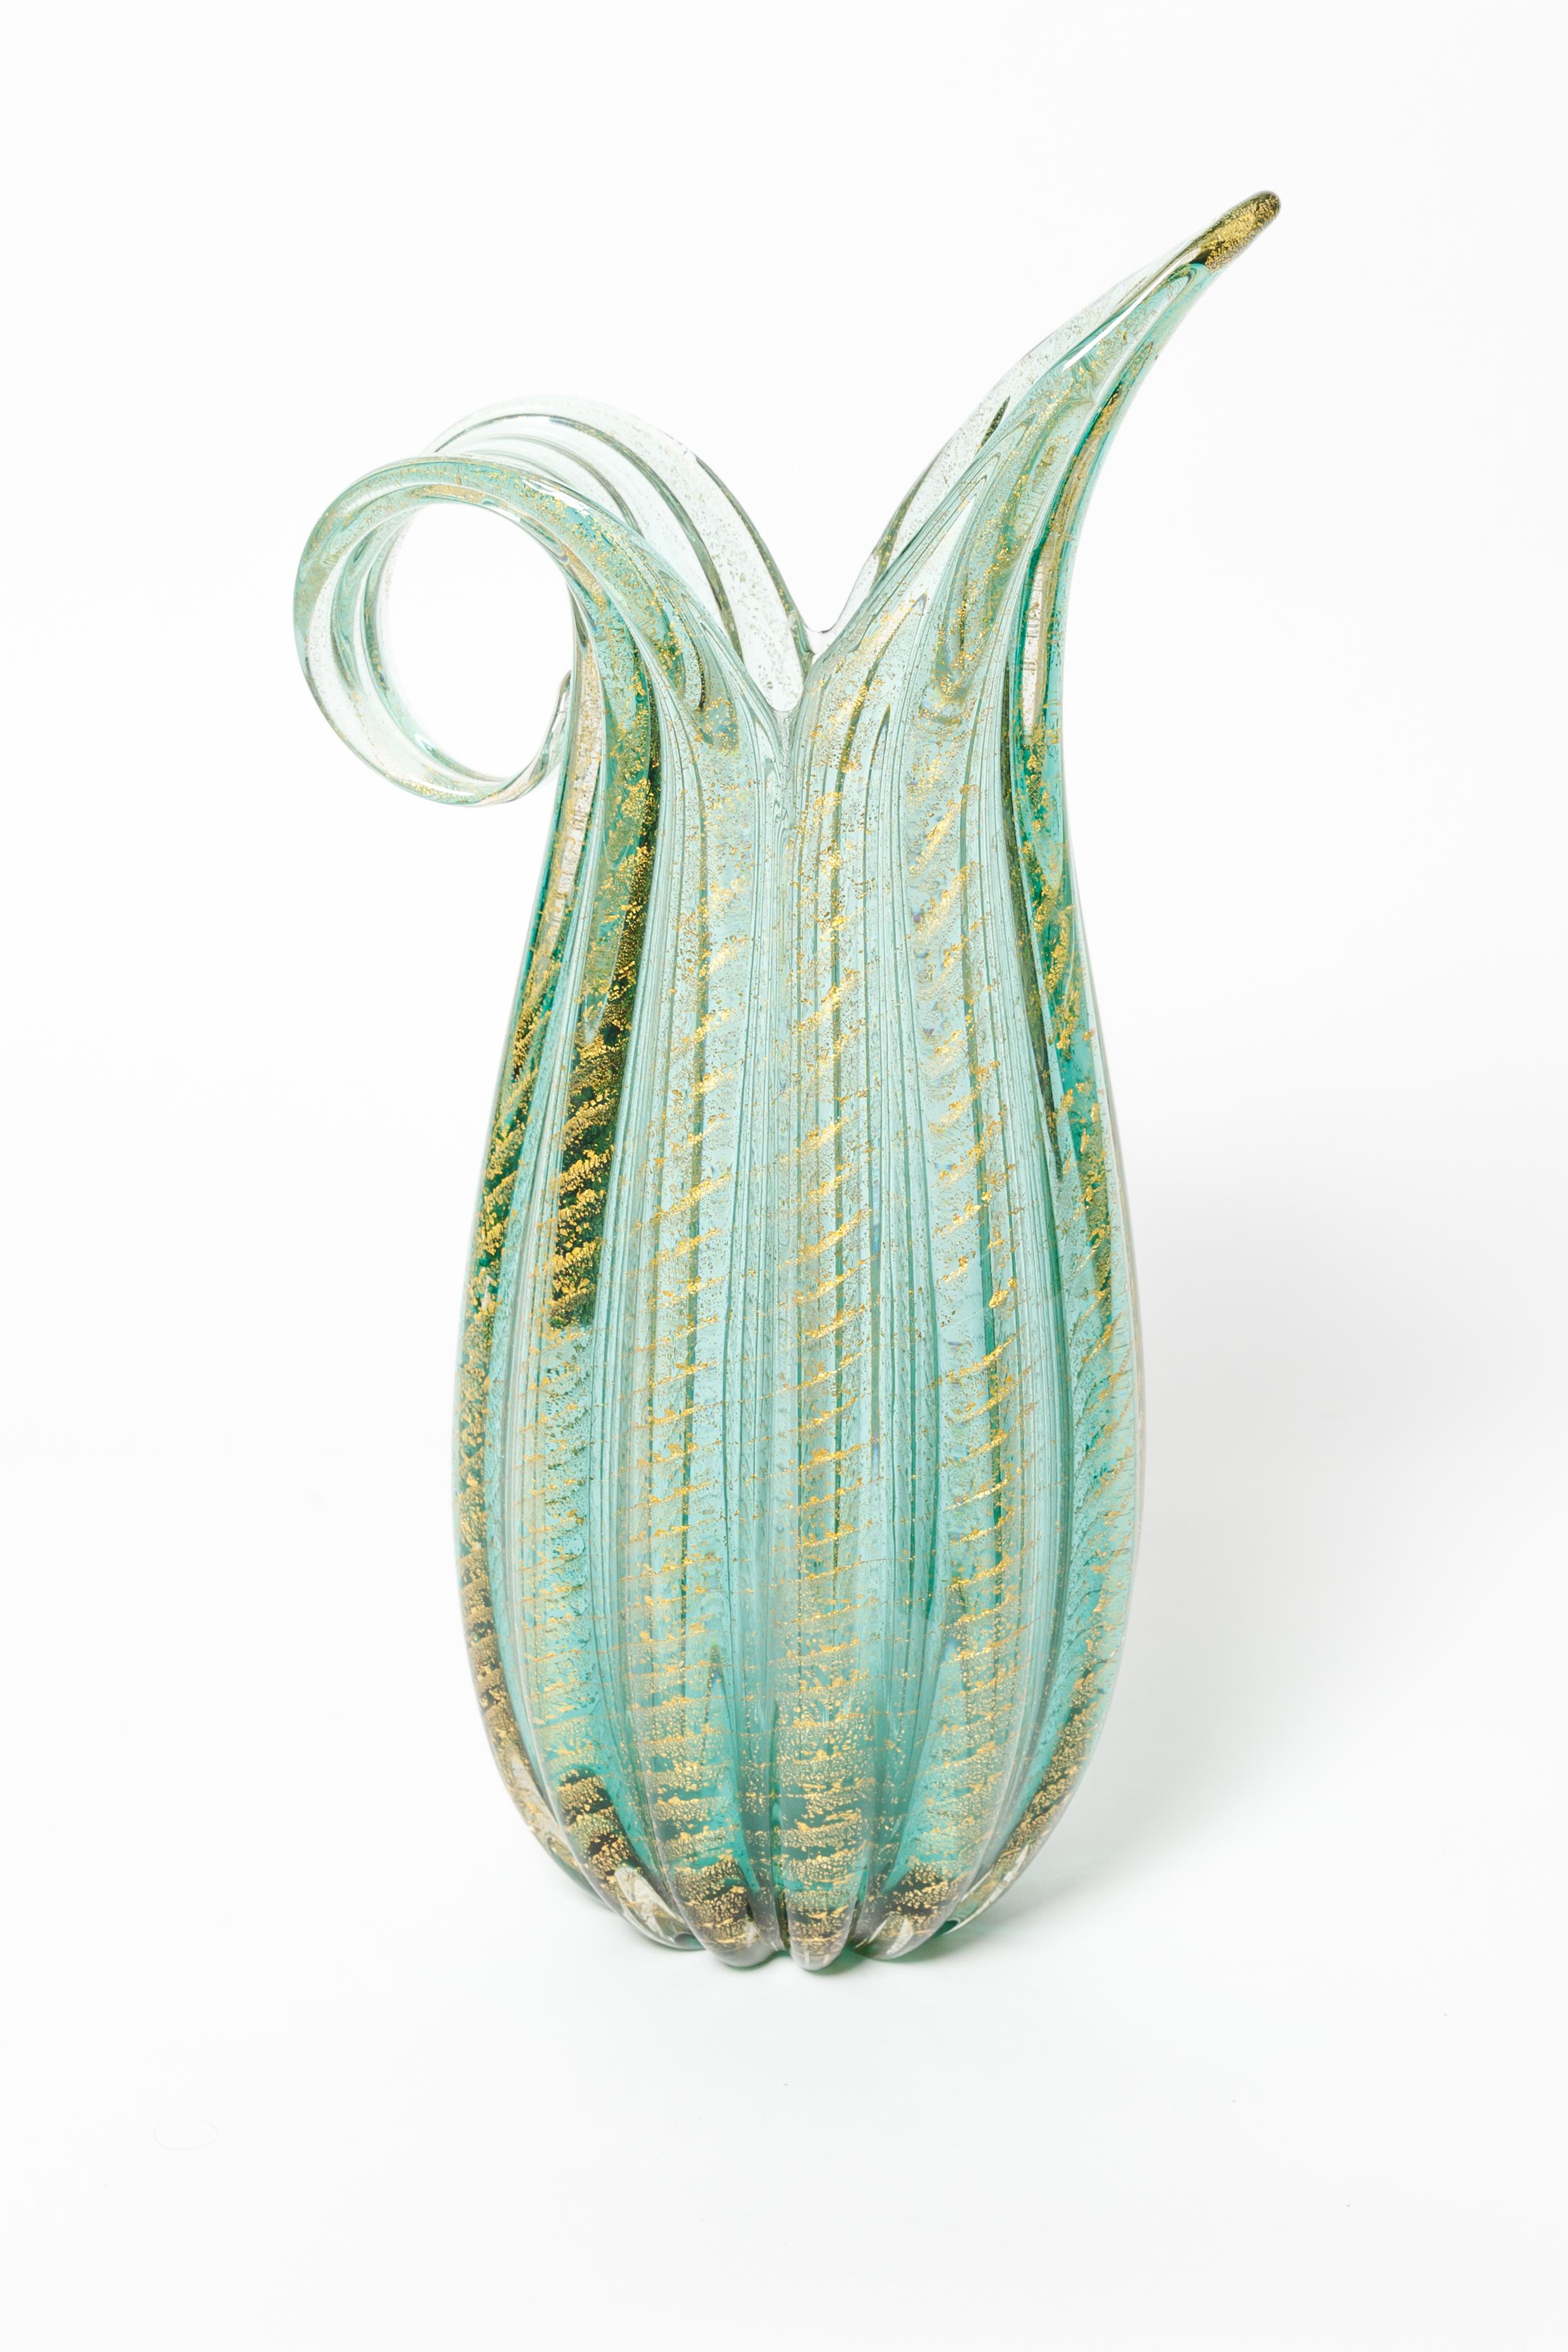 Green and gold murano glass handled pitcher with diagonal fluting.